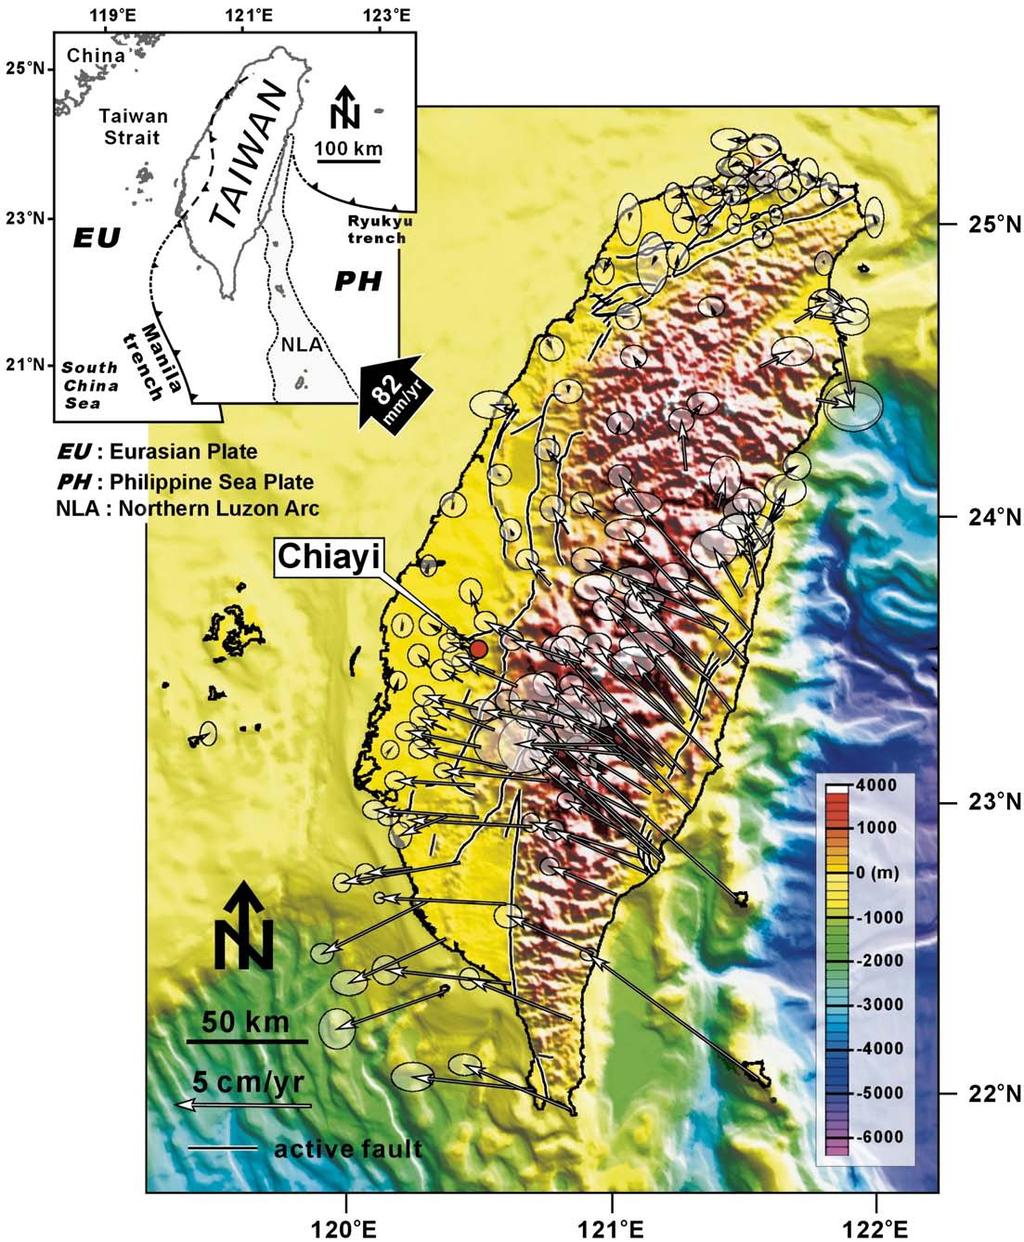 J.-Y. Yen et al. / Remote Sensing of Environment 112 (2008) 782 795 783 Fig. 1. Tectonic setting and velocity field of Taiwan.